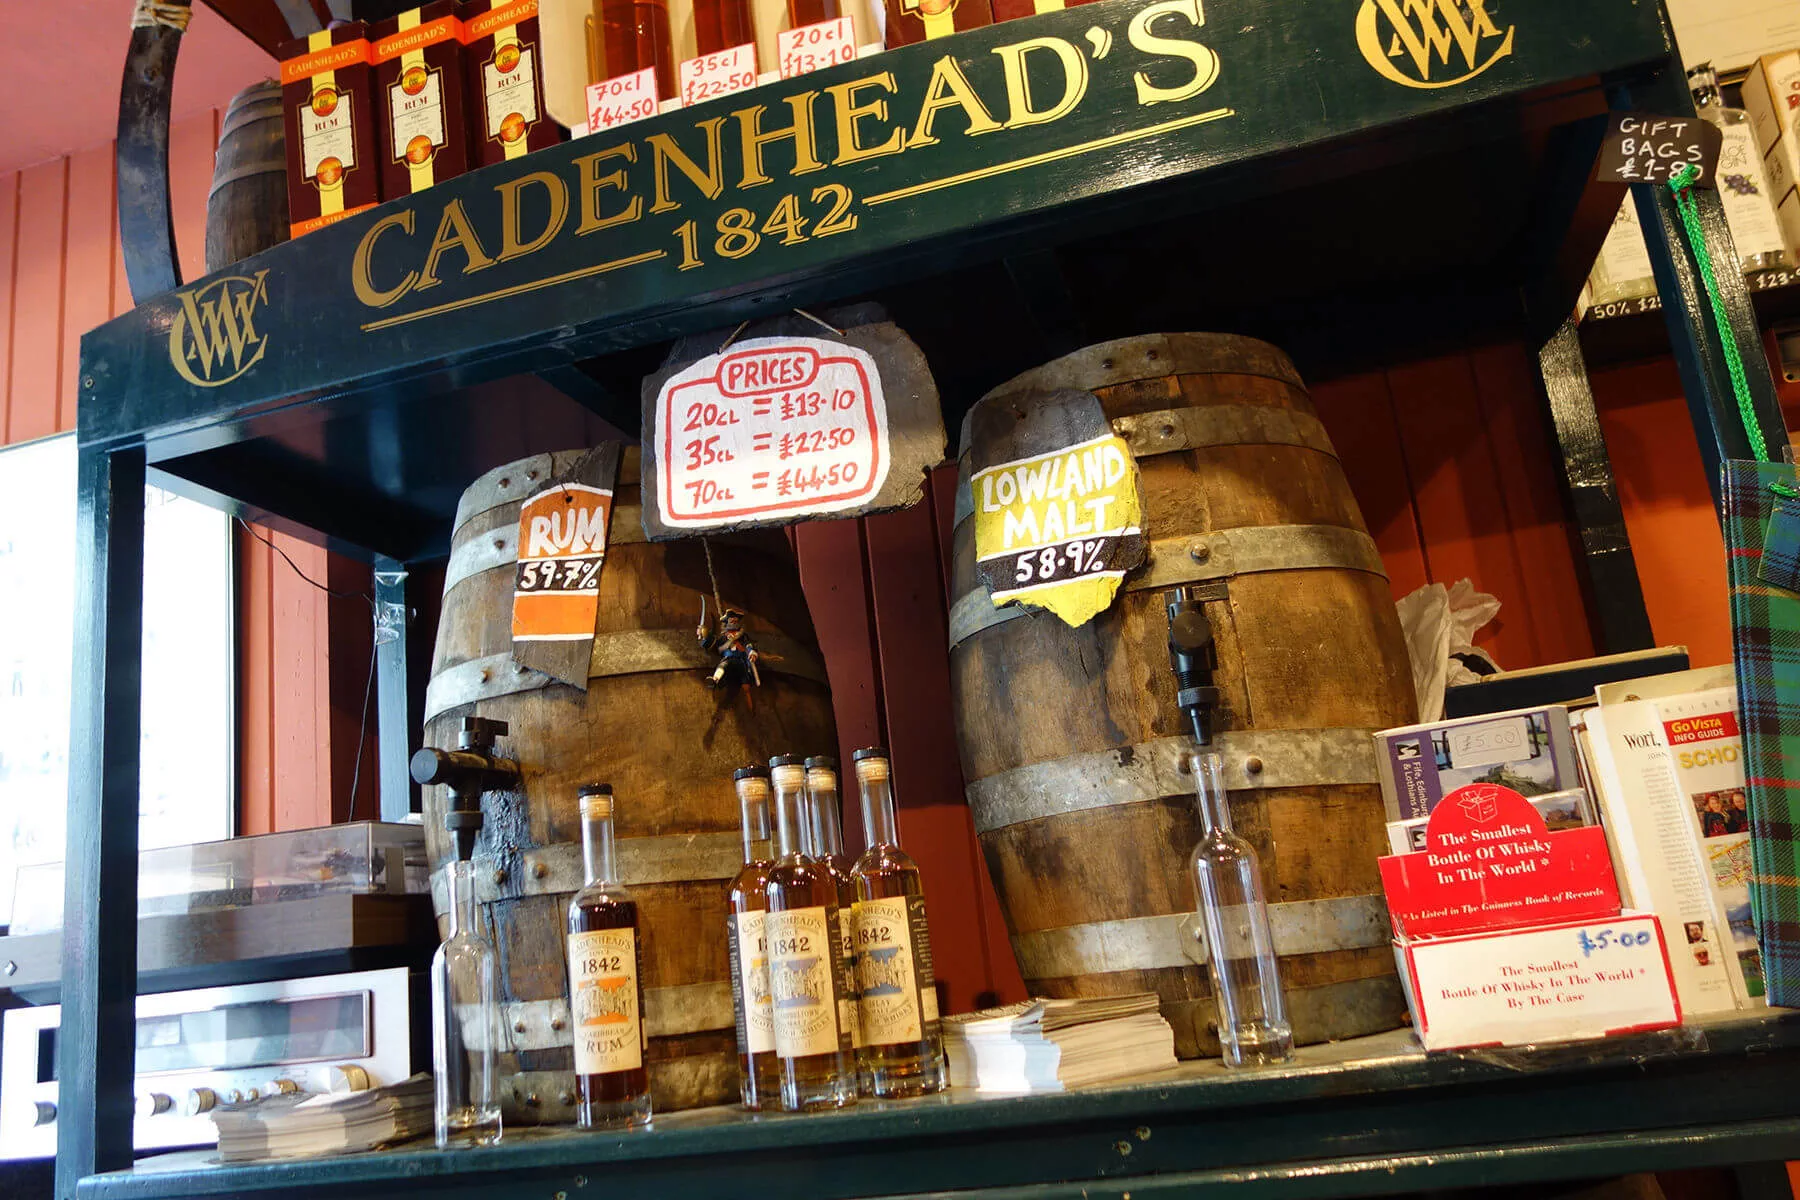 Cadenhead’s Whisky Shop in Edinburgh is a serious place to sample and buy pure whisky